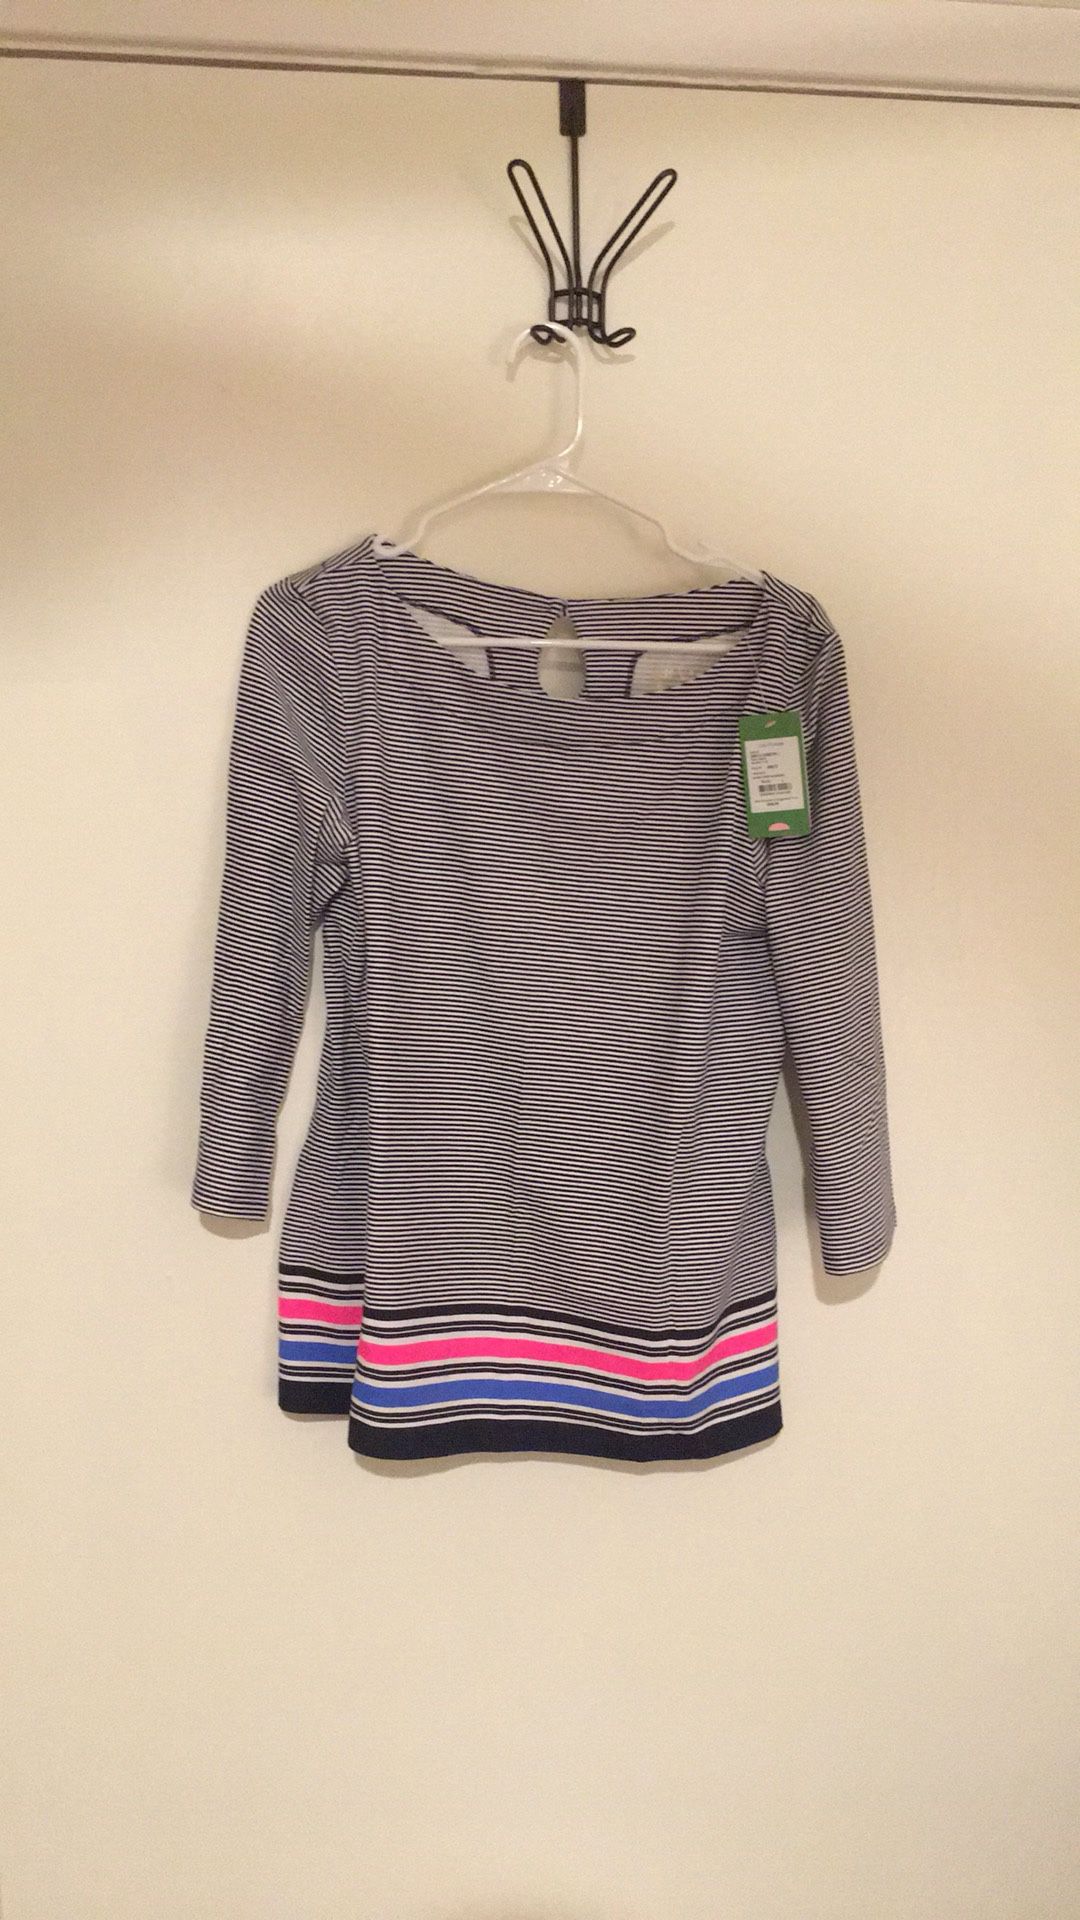 Lilly Pulitzer Waverly Top (NWT, size large)